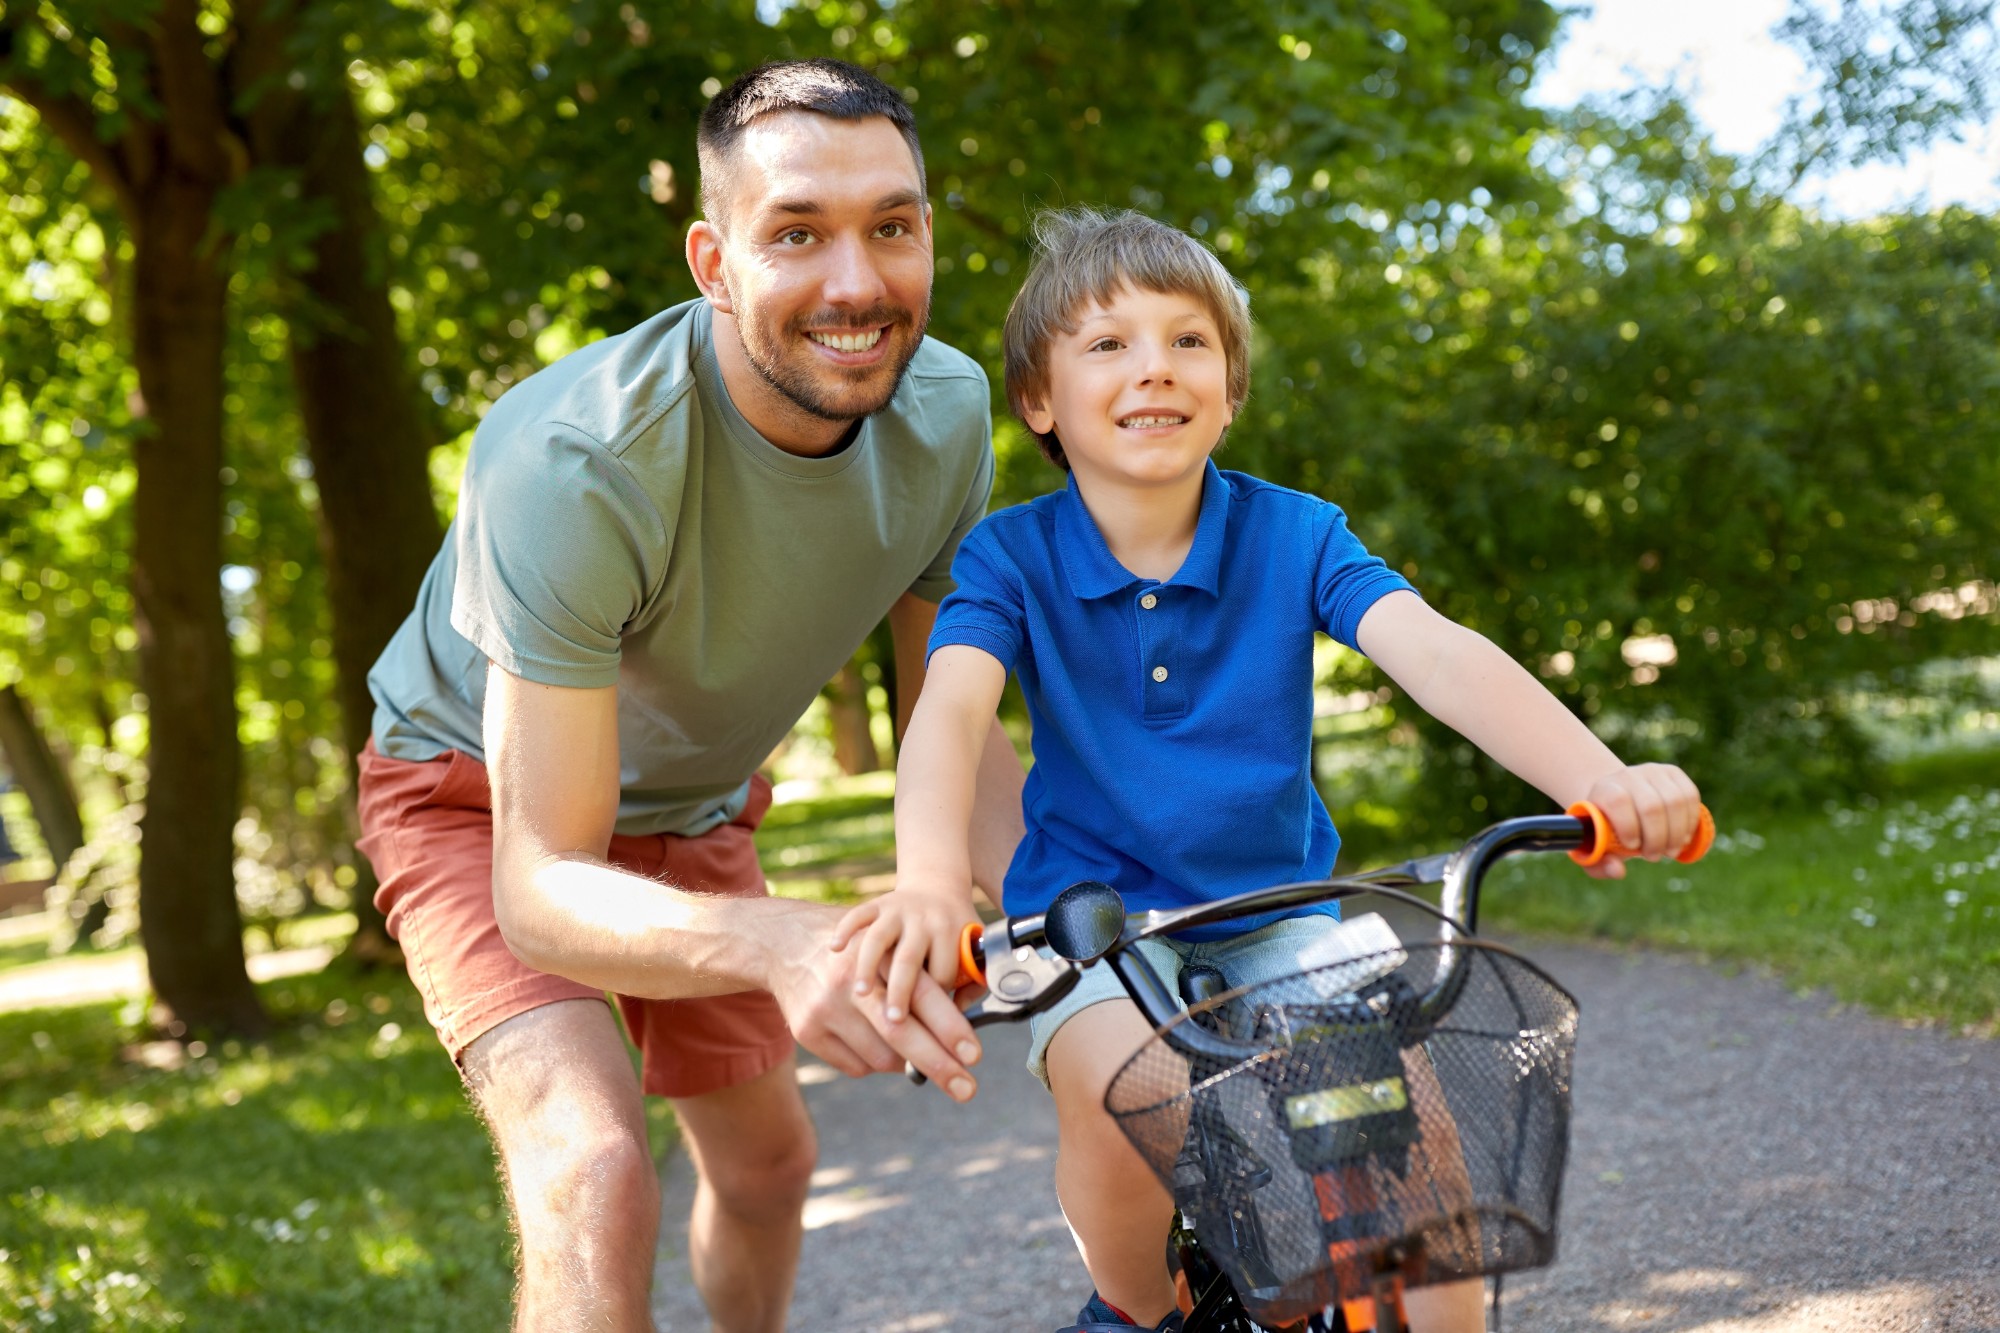 father teaching little son to ride bicycle at park